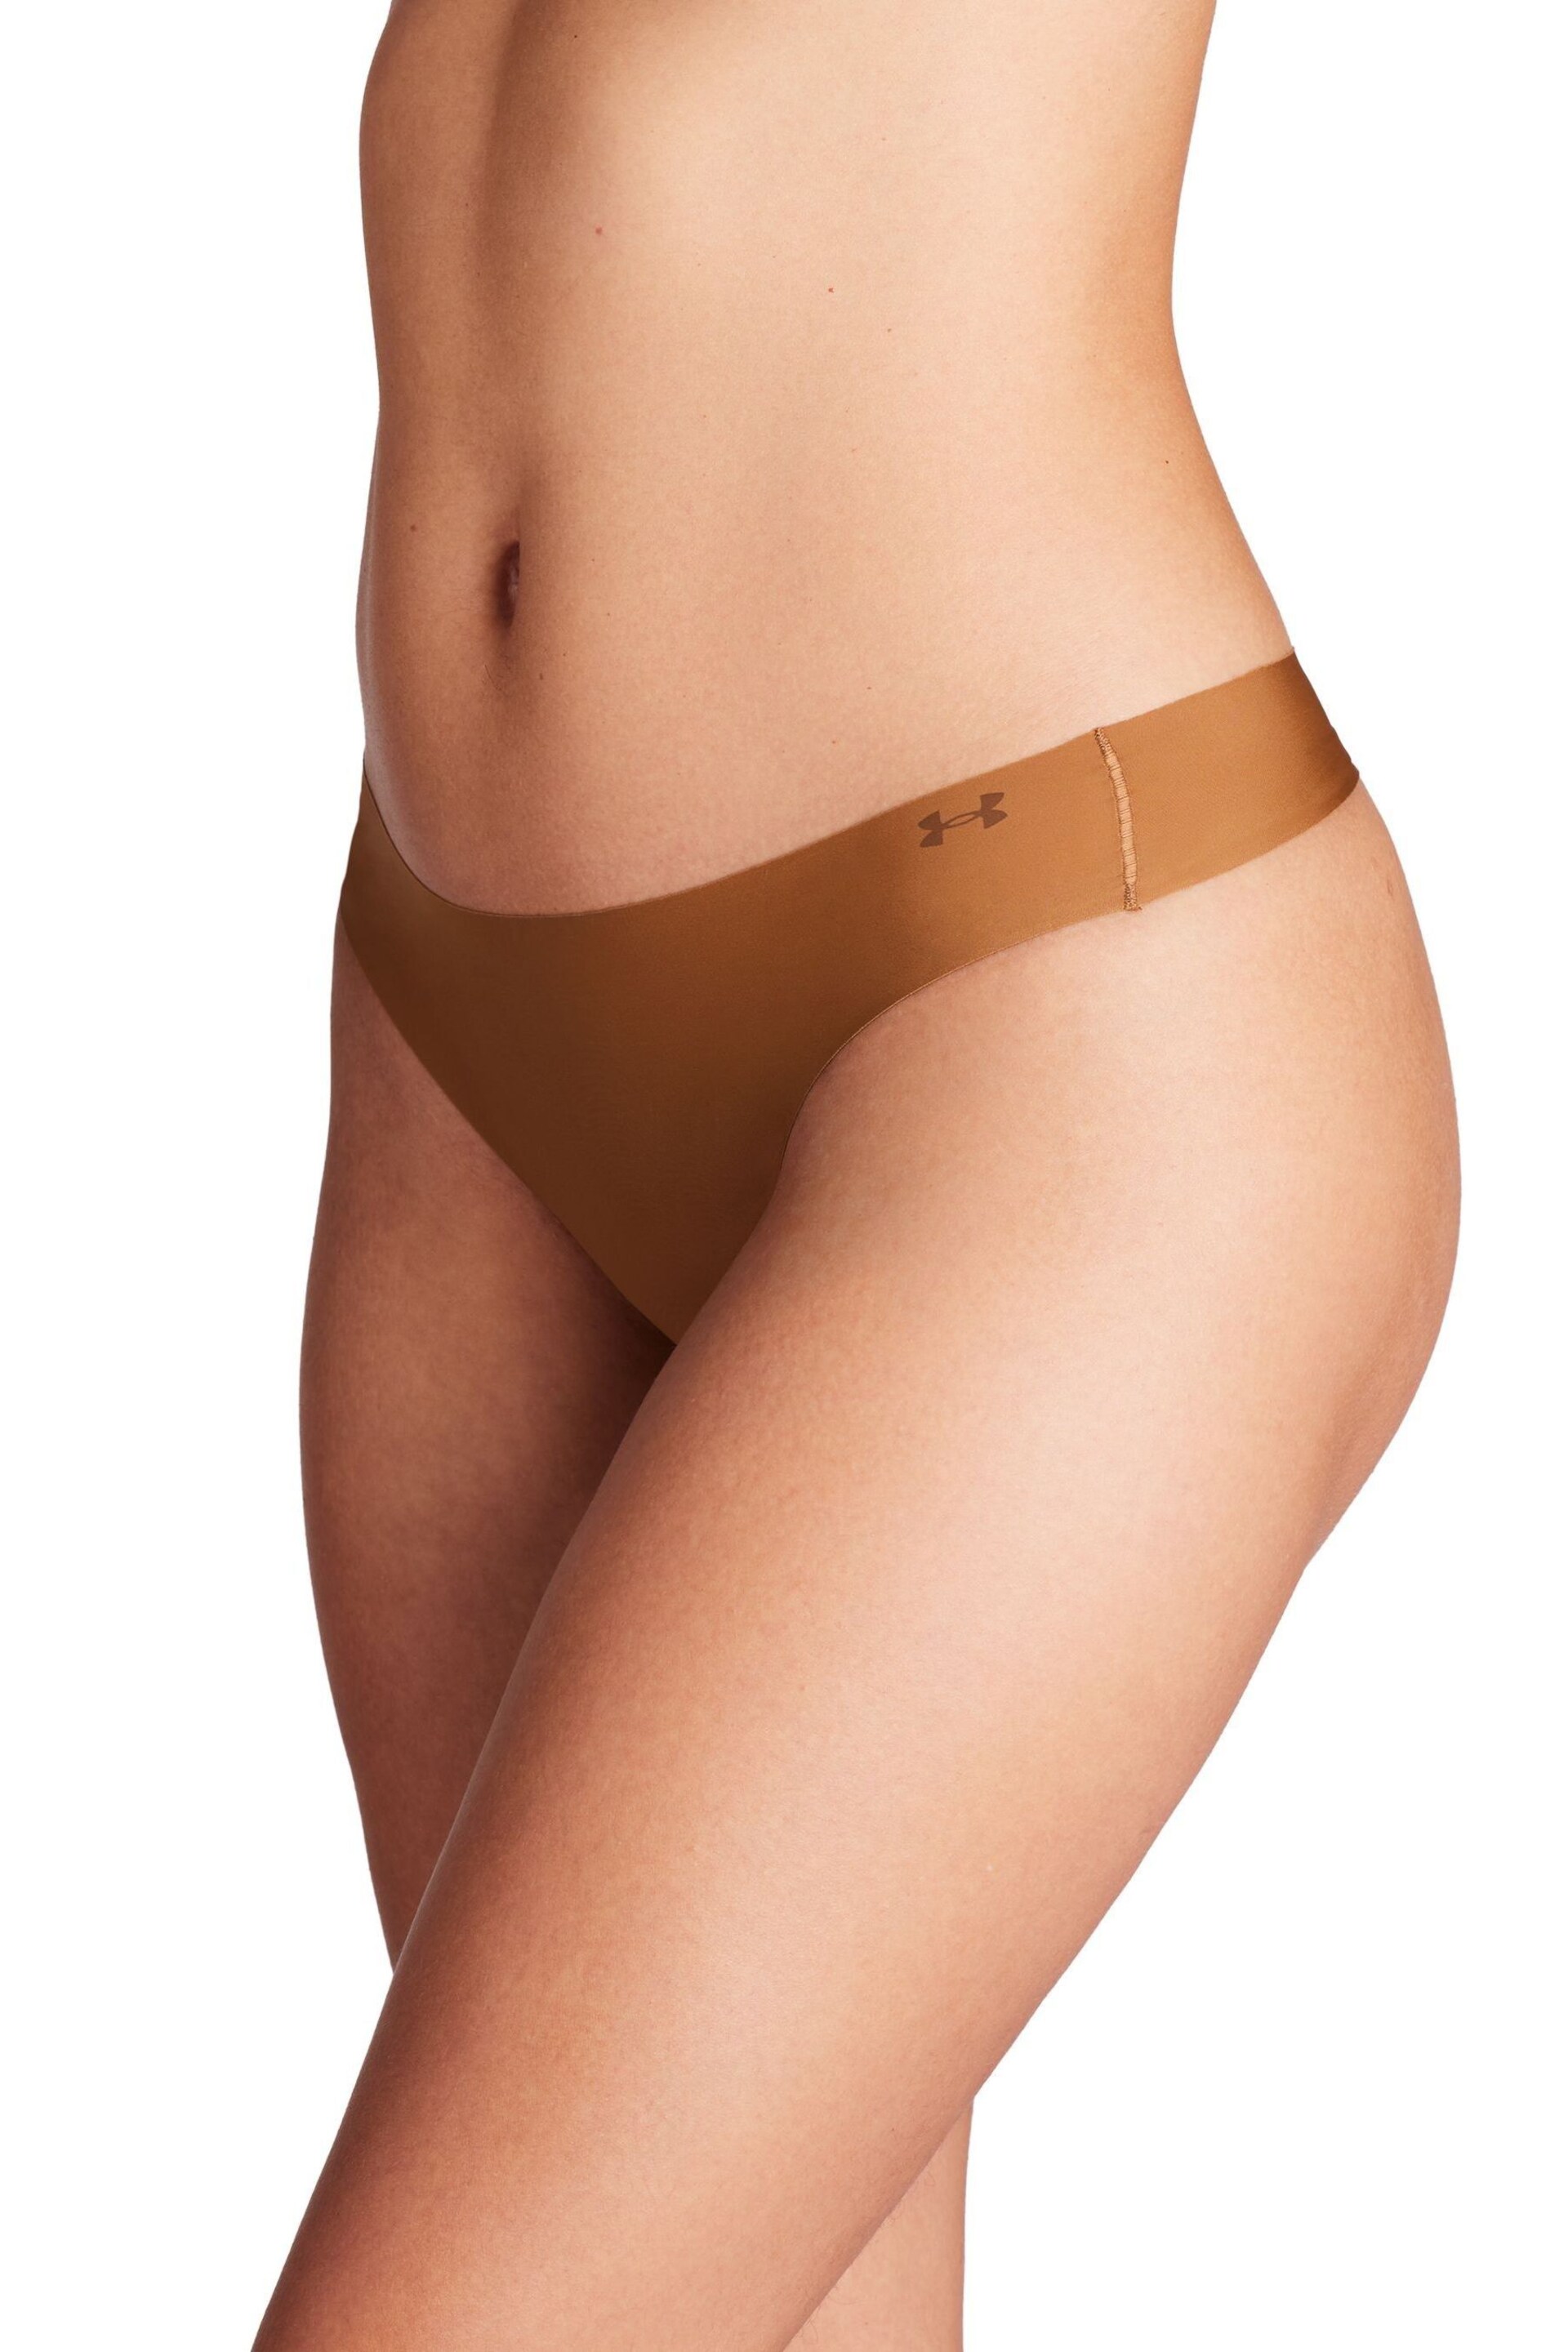 Under Armour Light Brown No Show Pure Stretch Thongs 3 Pack - Image 3 of 5